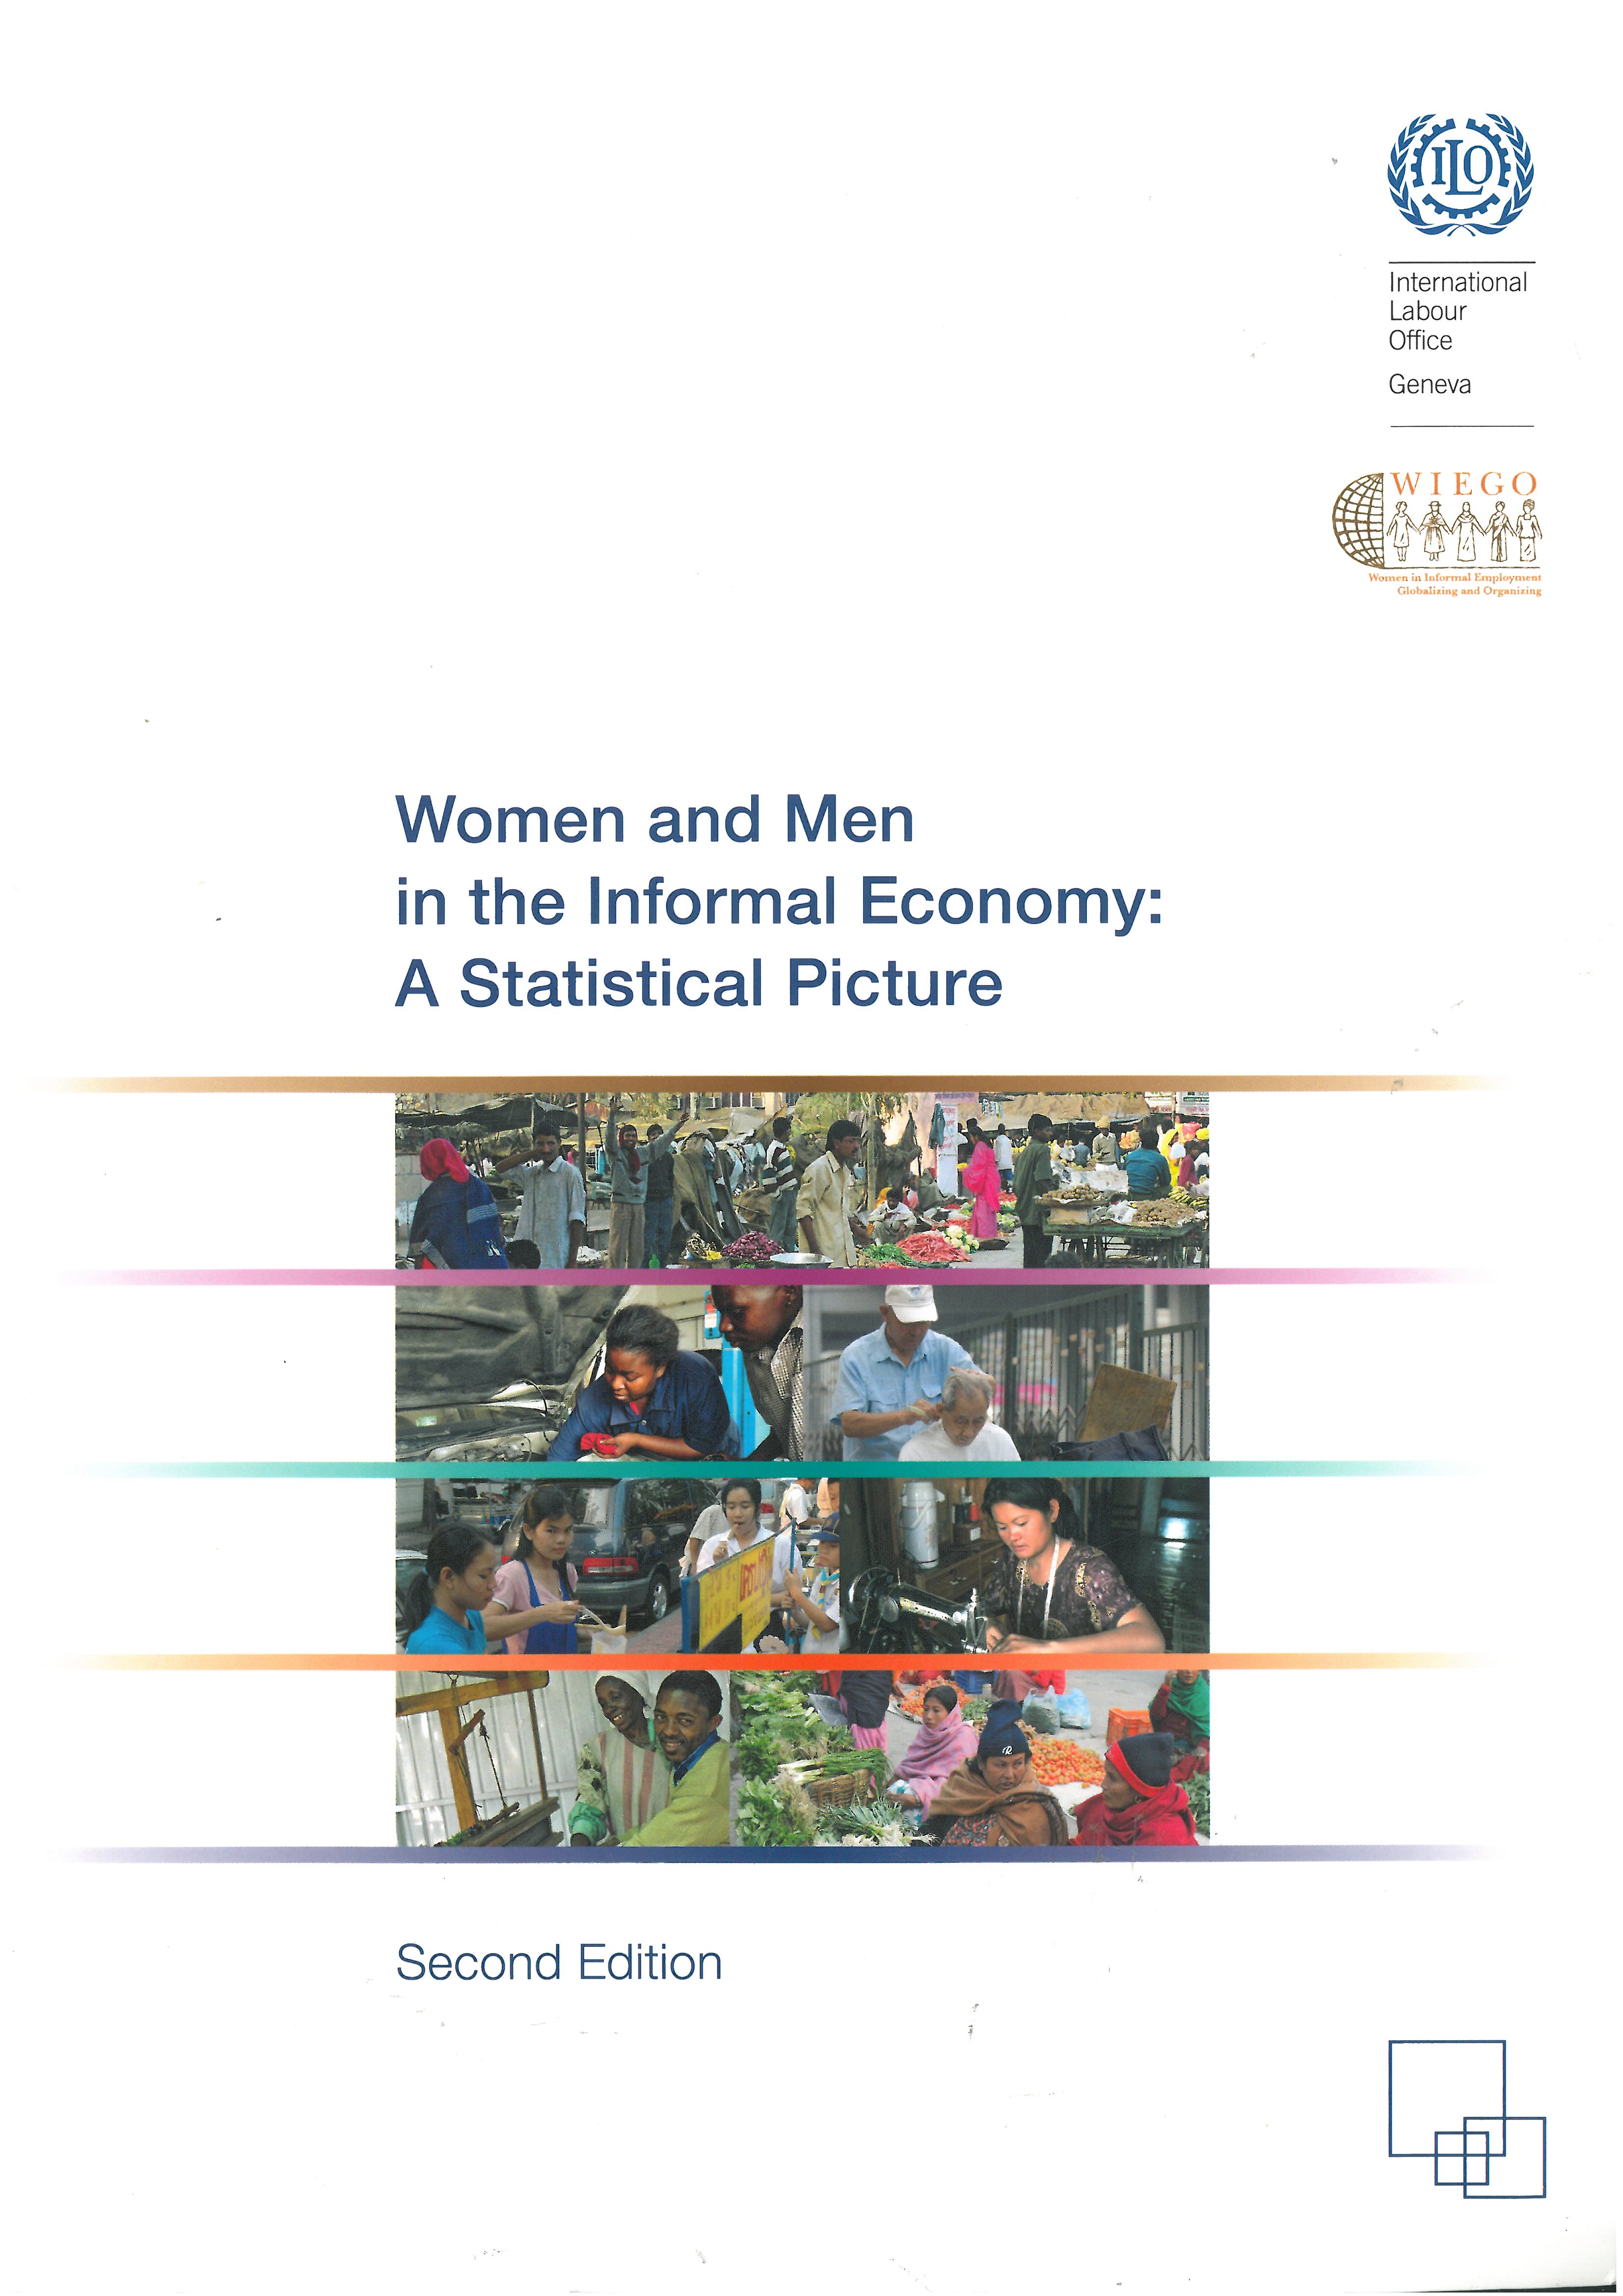 Women and men in the informal economy : a statistical picture 책표지